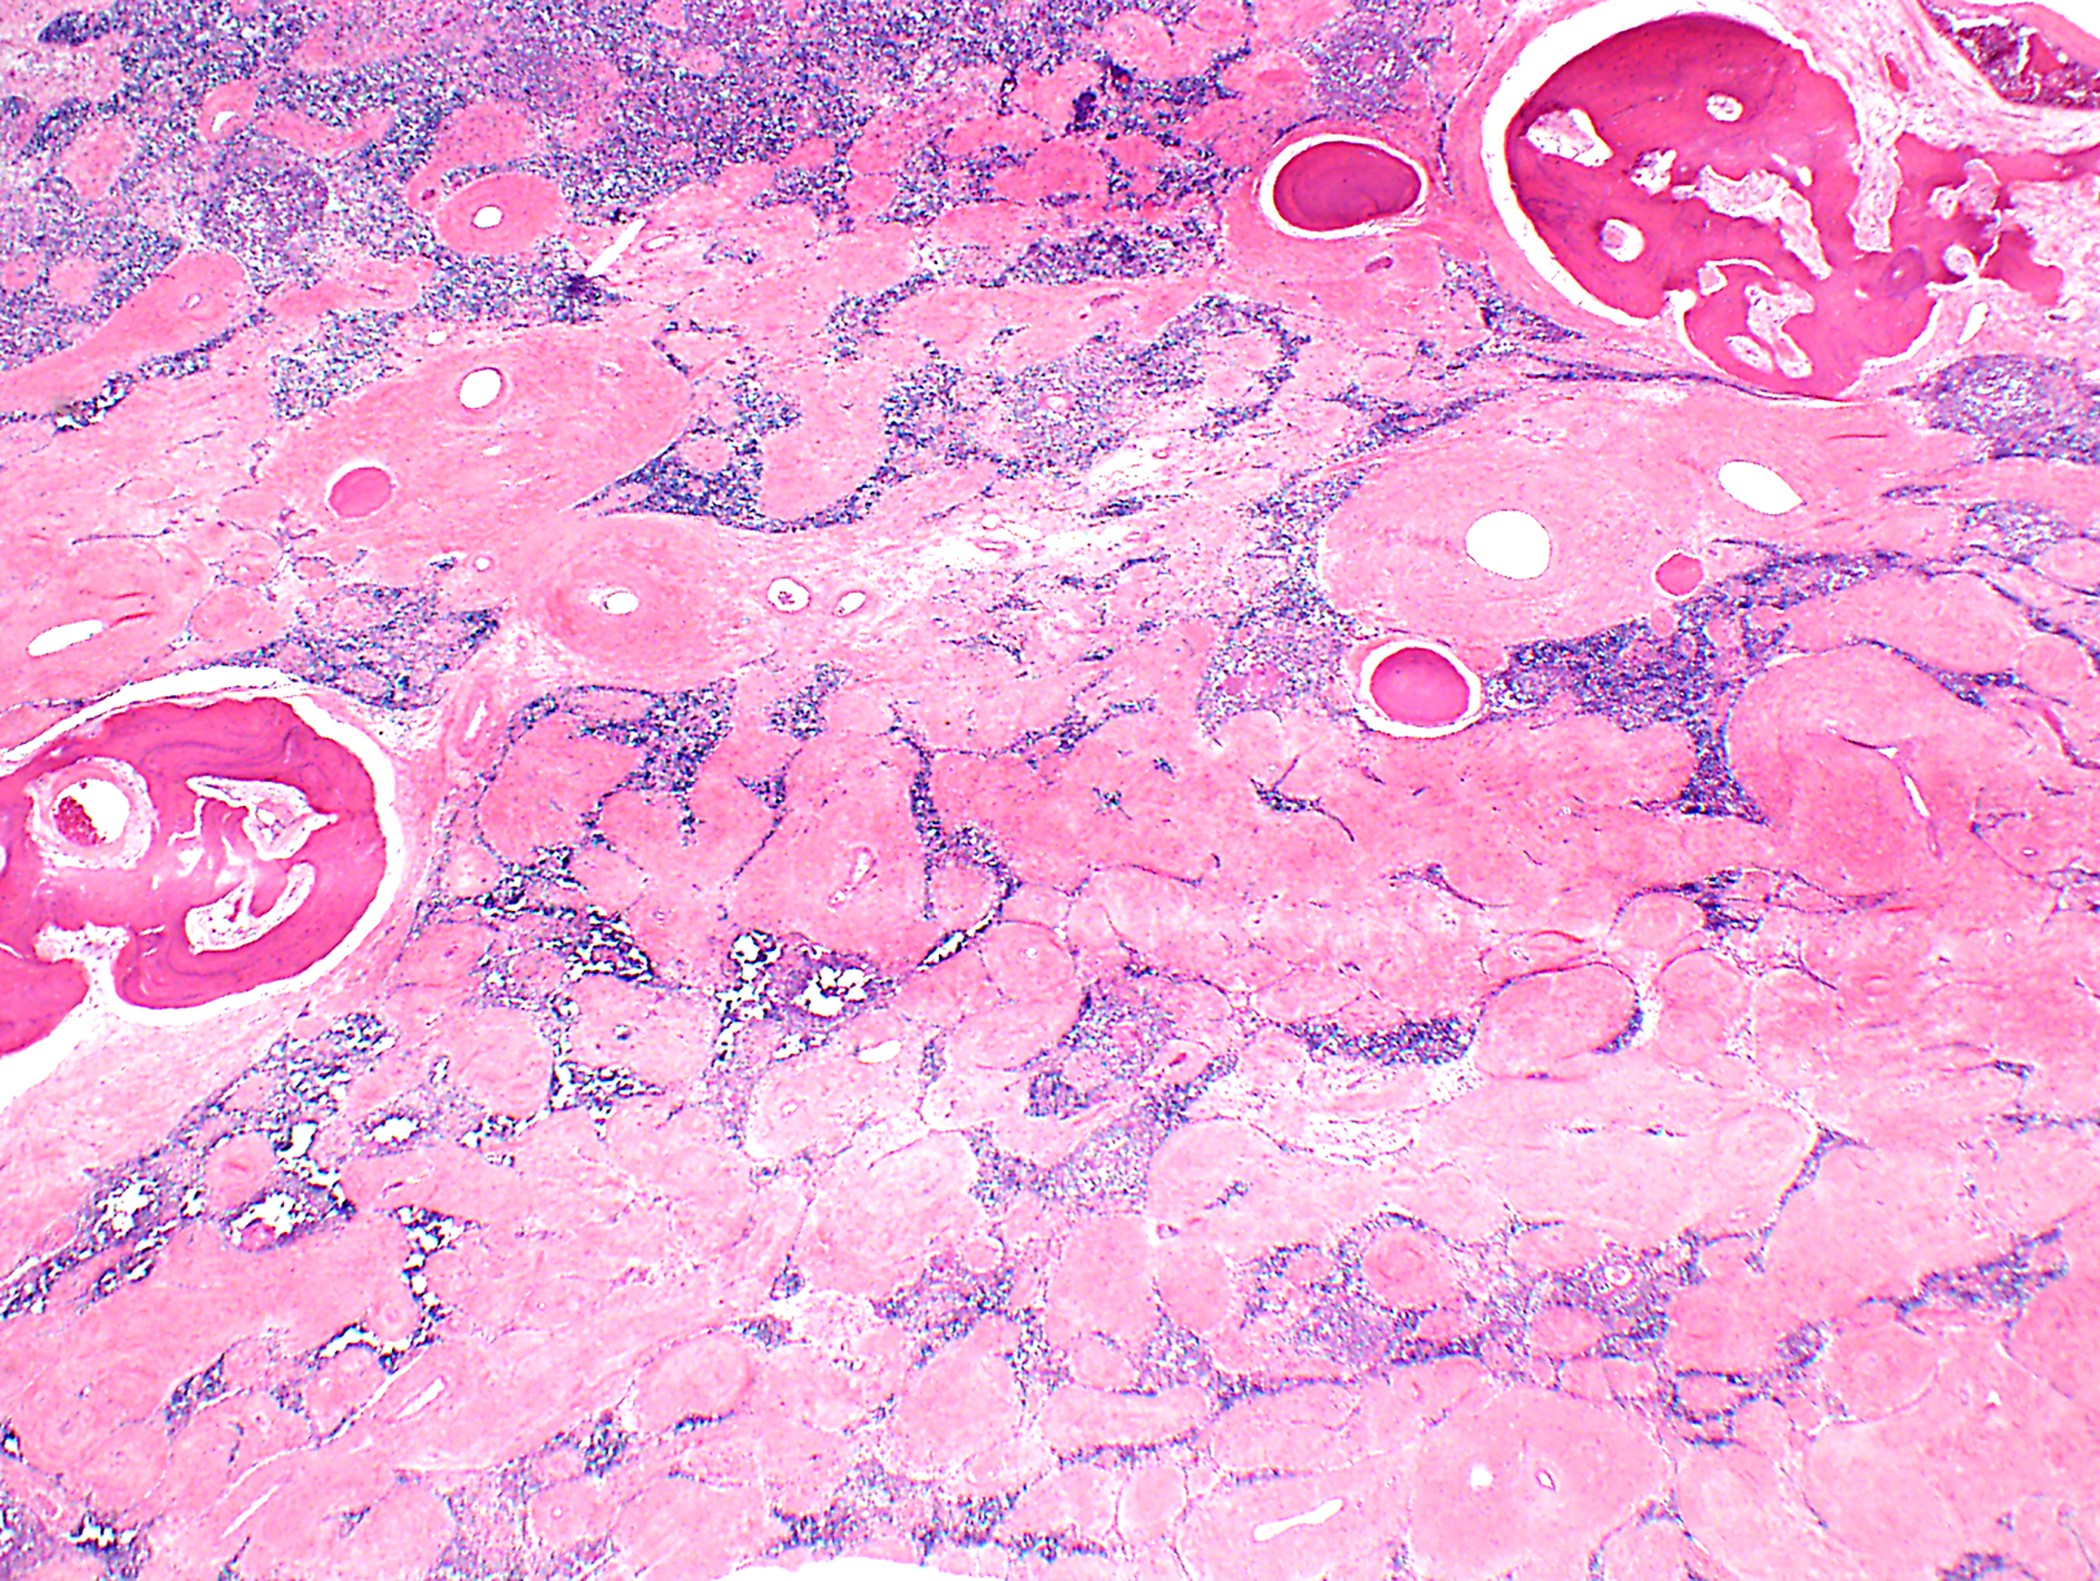 Thymoma with extensive sclerosis and ossification